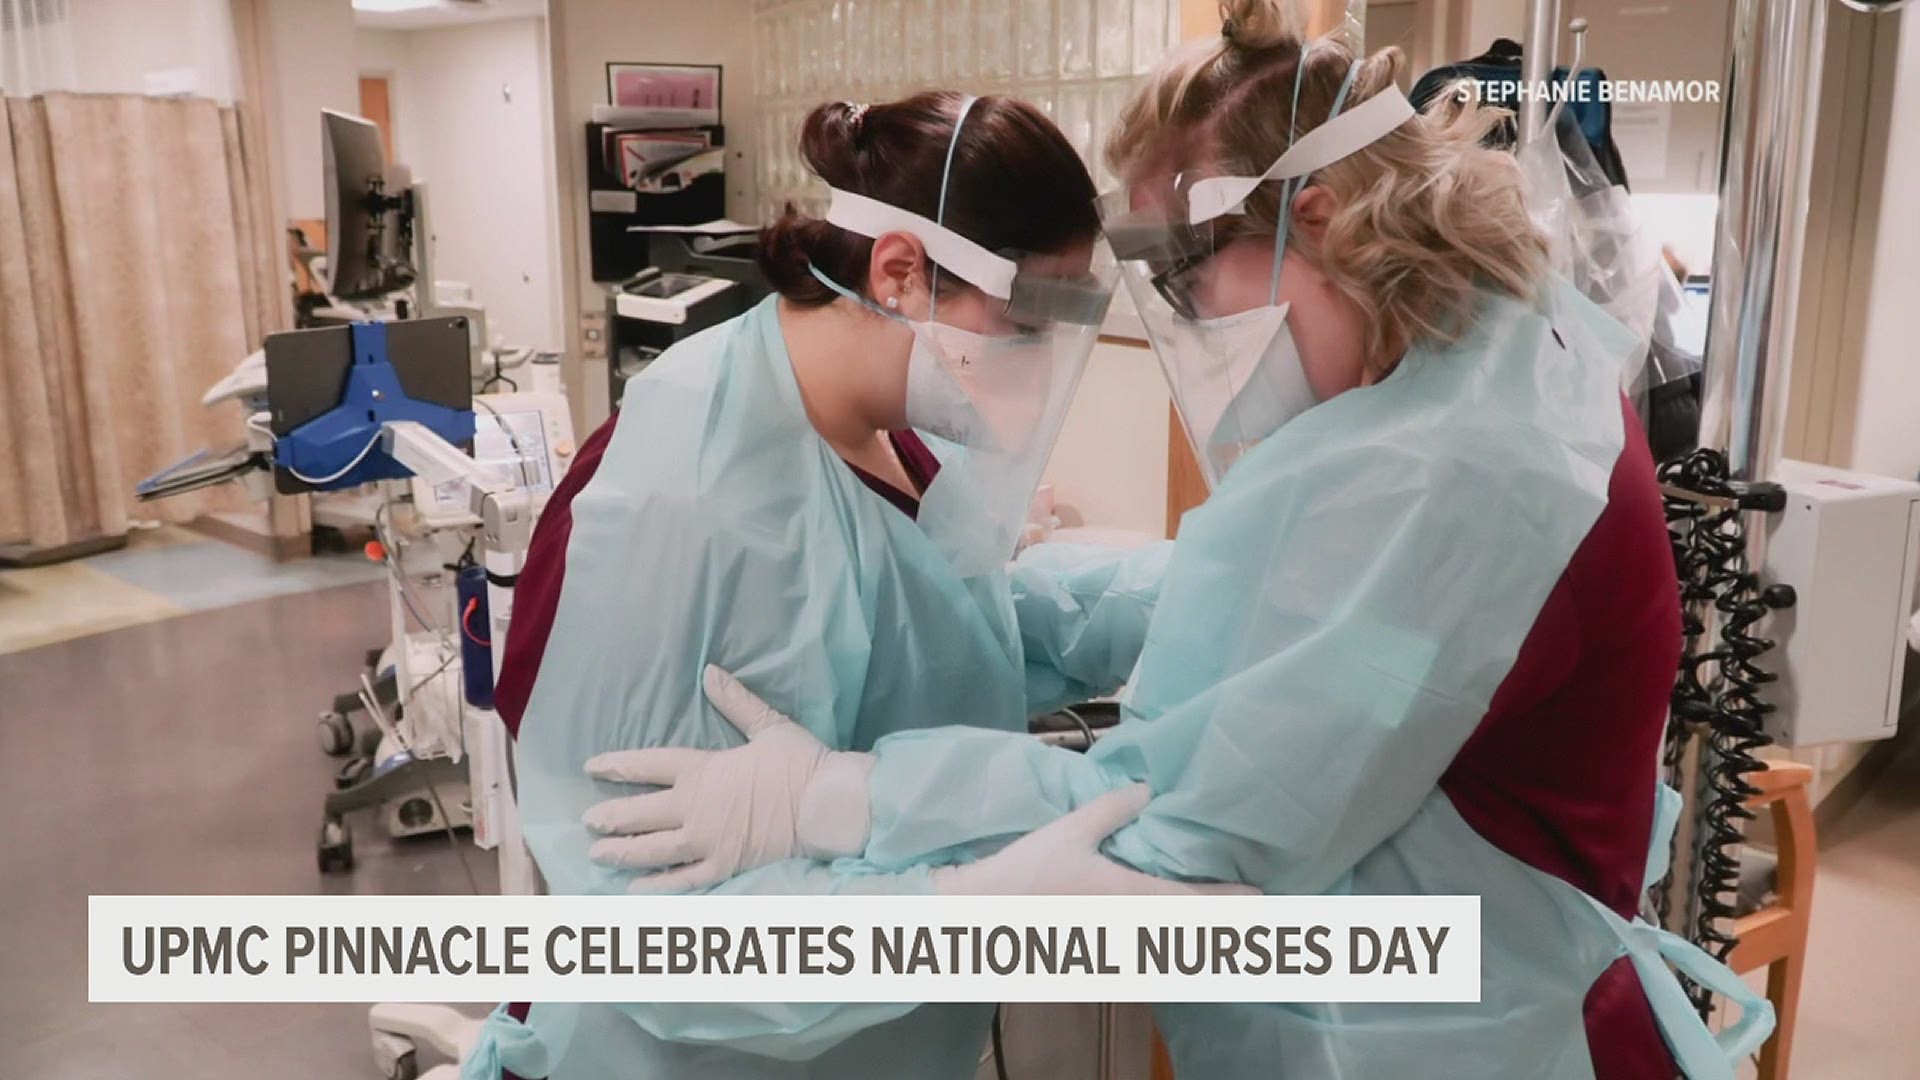 They are recognized for their hard, life-saving work year-round. National Nurses Day, however, has a whole new meaning amid the pandemic.